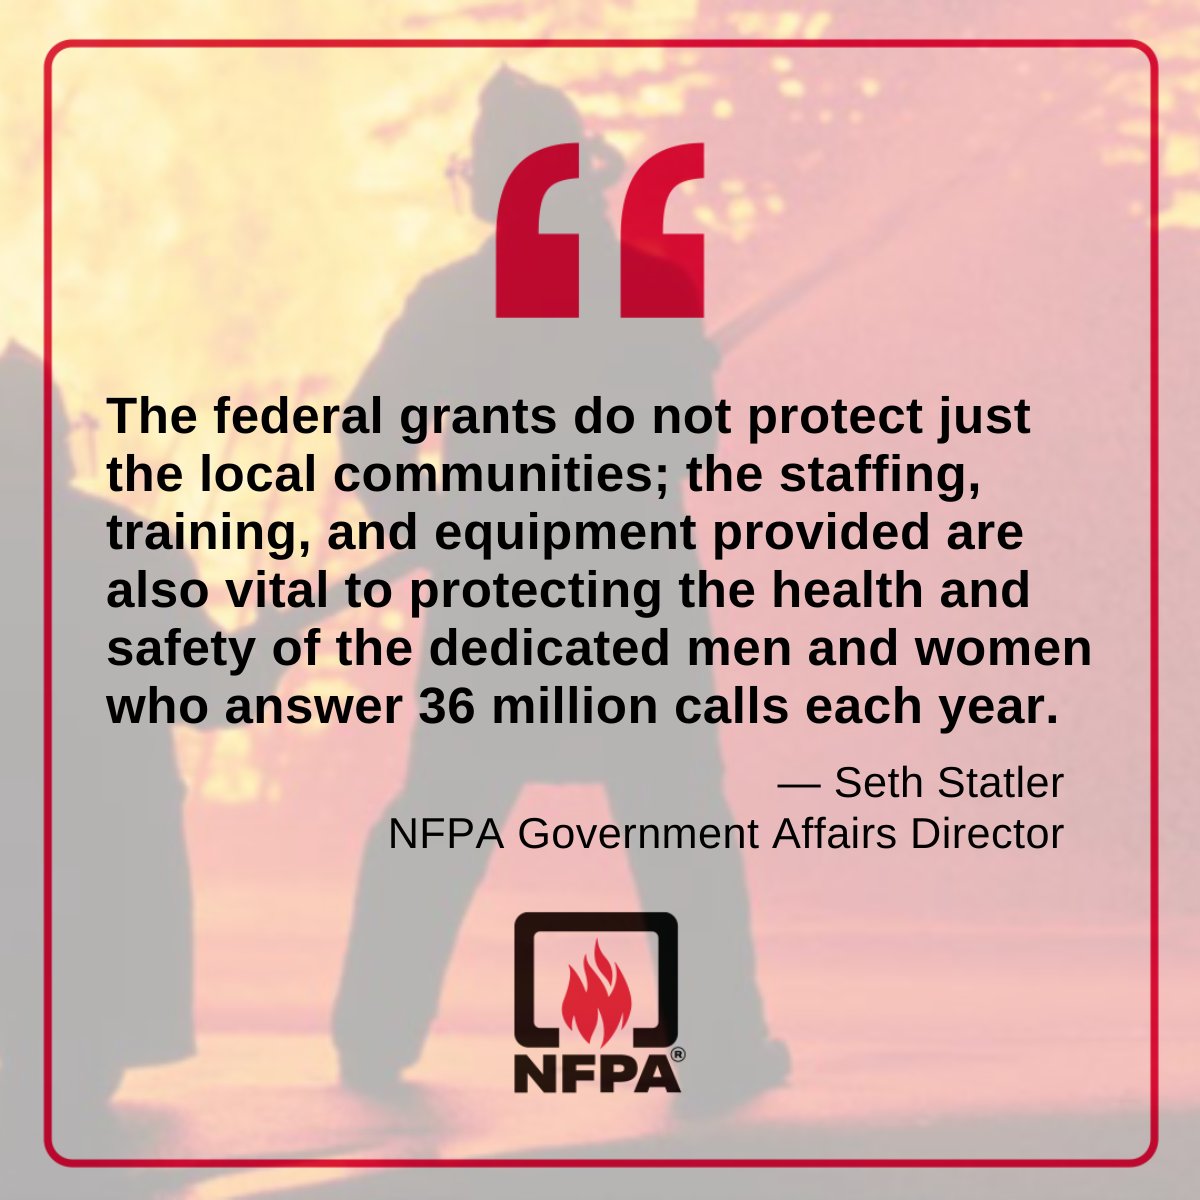 Did you know two important fire service grant programs could end this year unless Congress acts? Fire departments & firefighters depend on these grants for staffing, training, and equipment to keep our communities safe. Read more: nfpa.social/VHYC50QQBQI